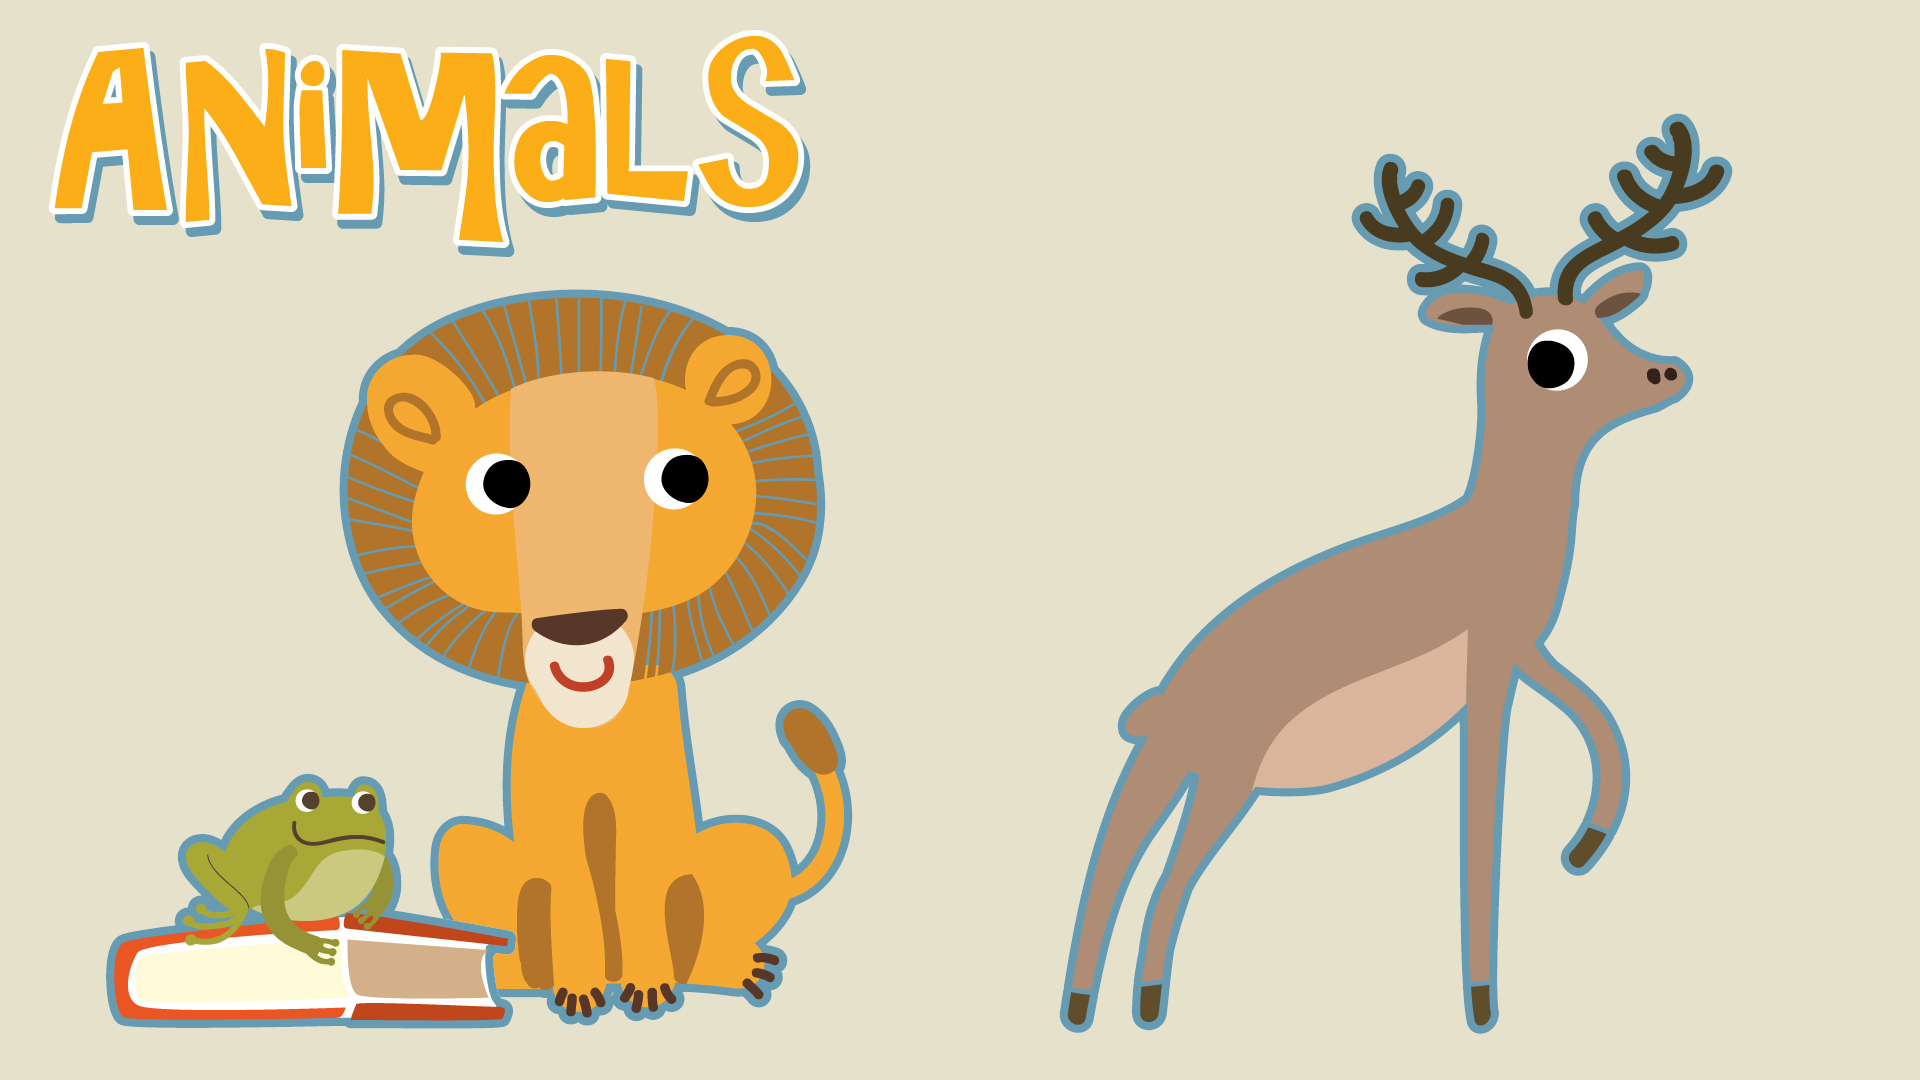 Animals with a small green frog sitting on a book, a lion and a deer